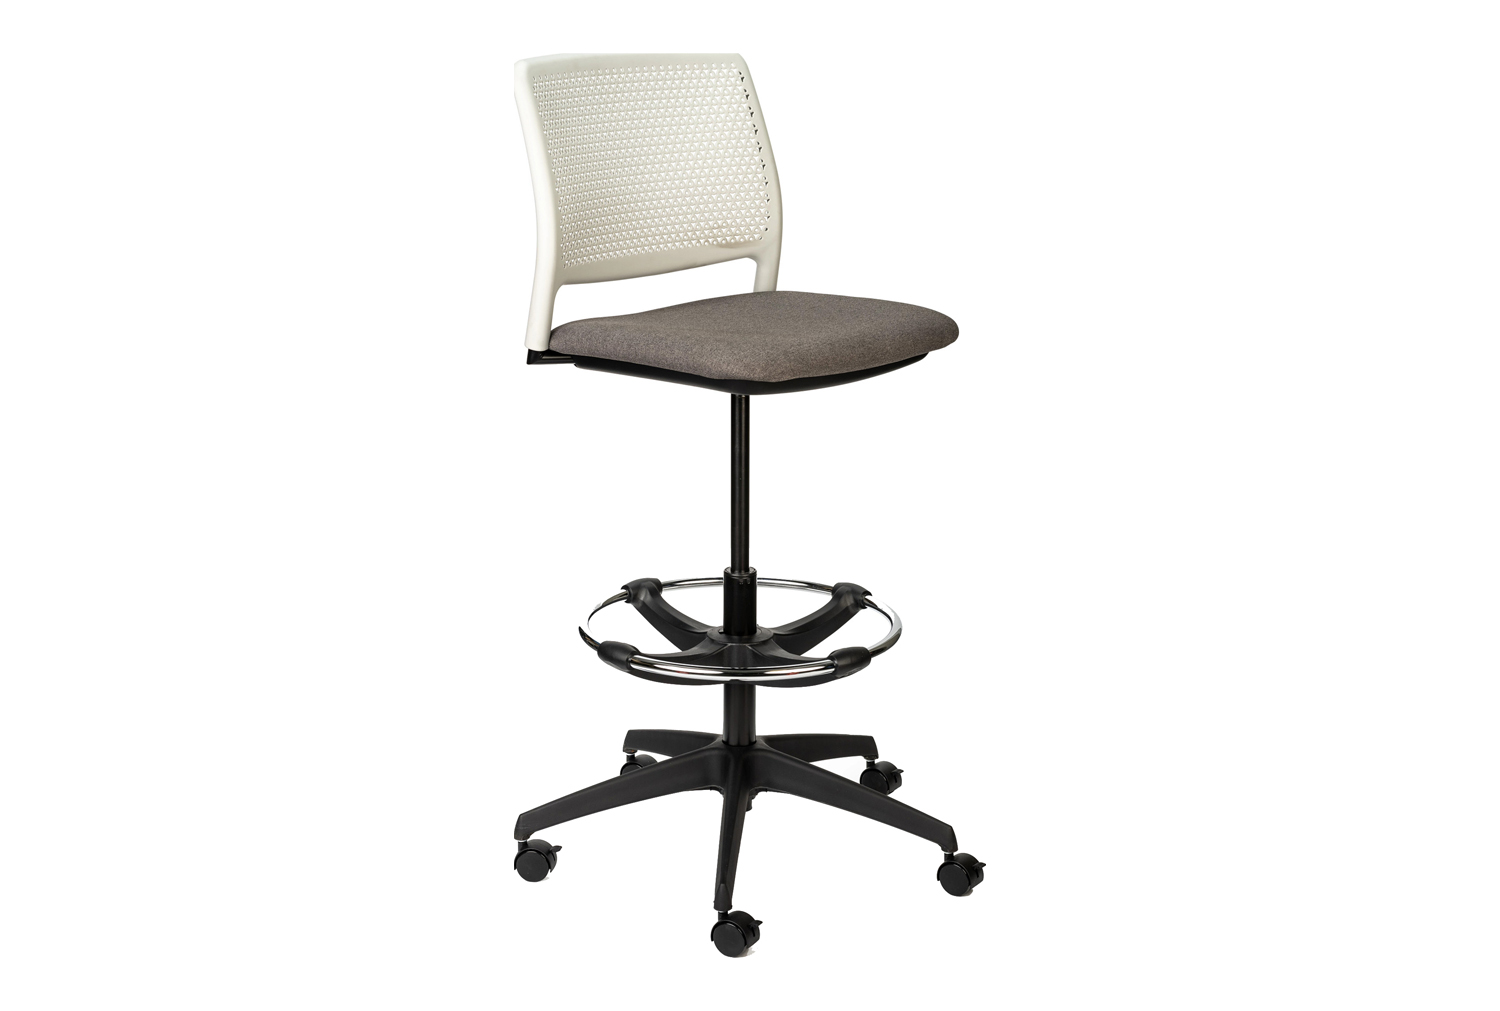 Qty 3 - Grafton Draughtsman Office Chair With Seat Pad, Black, Forward